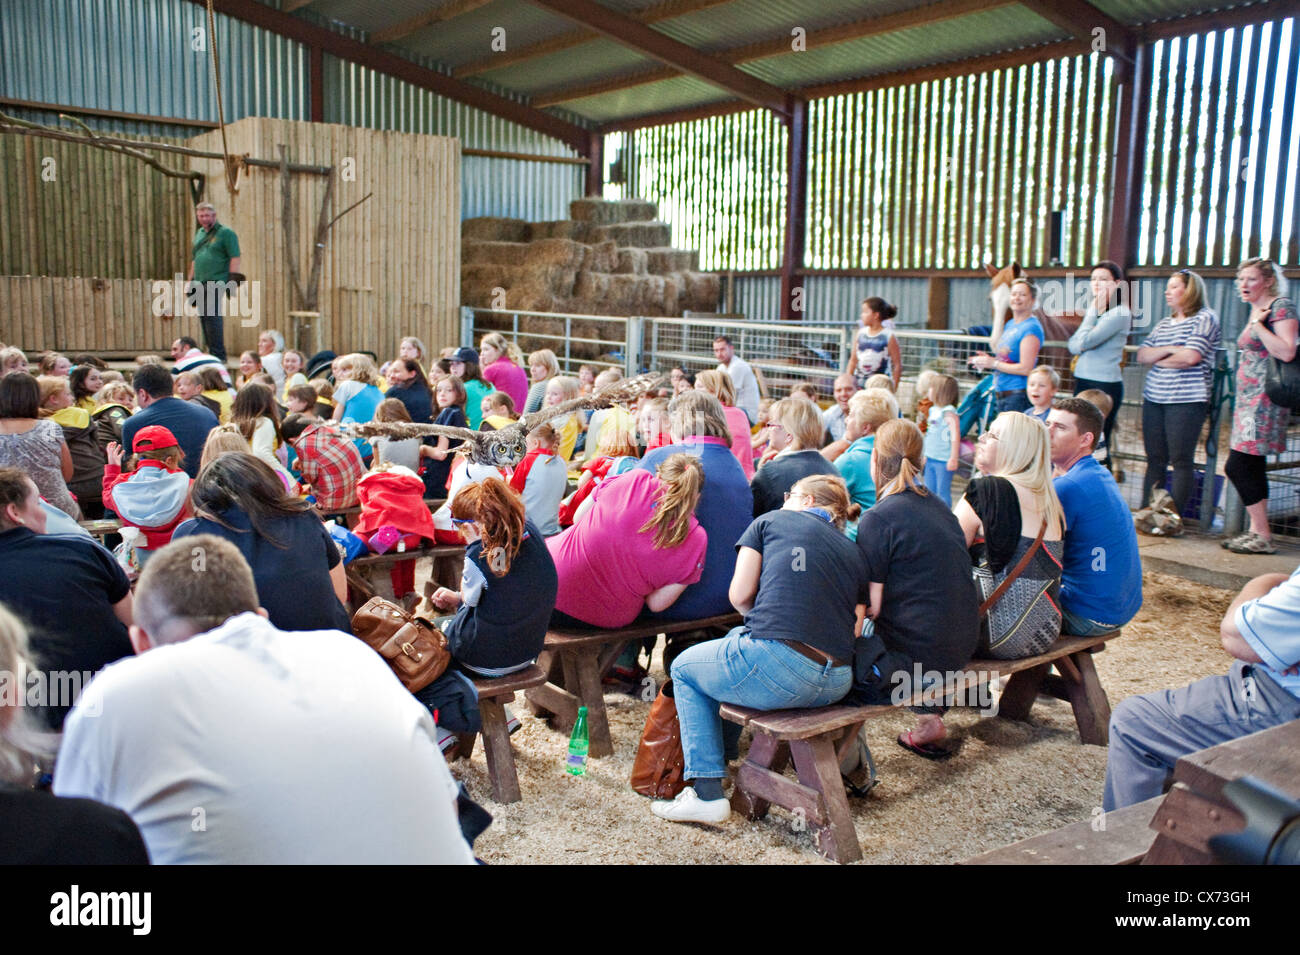 A Crowd ducking at a bird display, UK Stock Photo